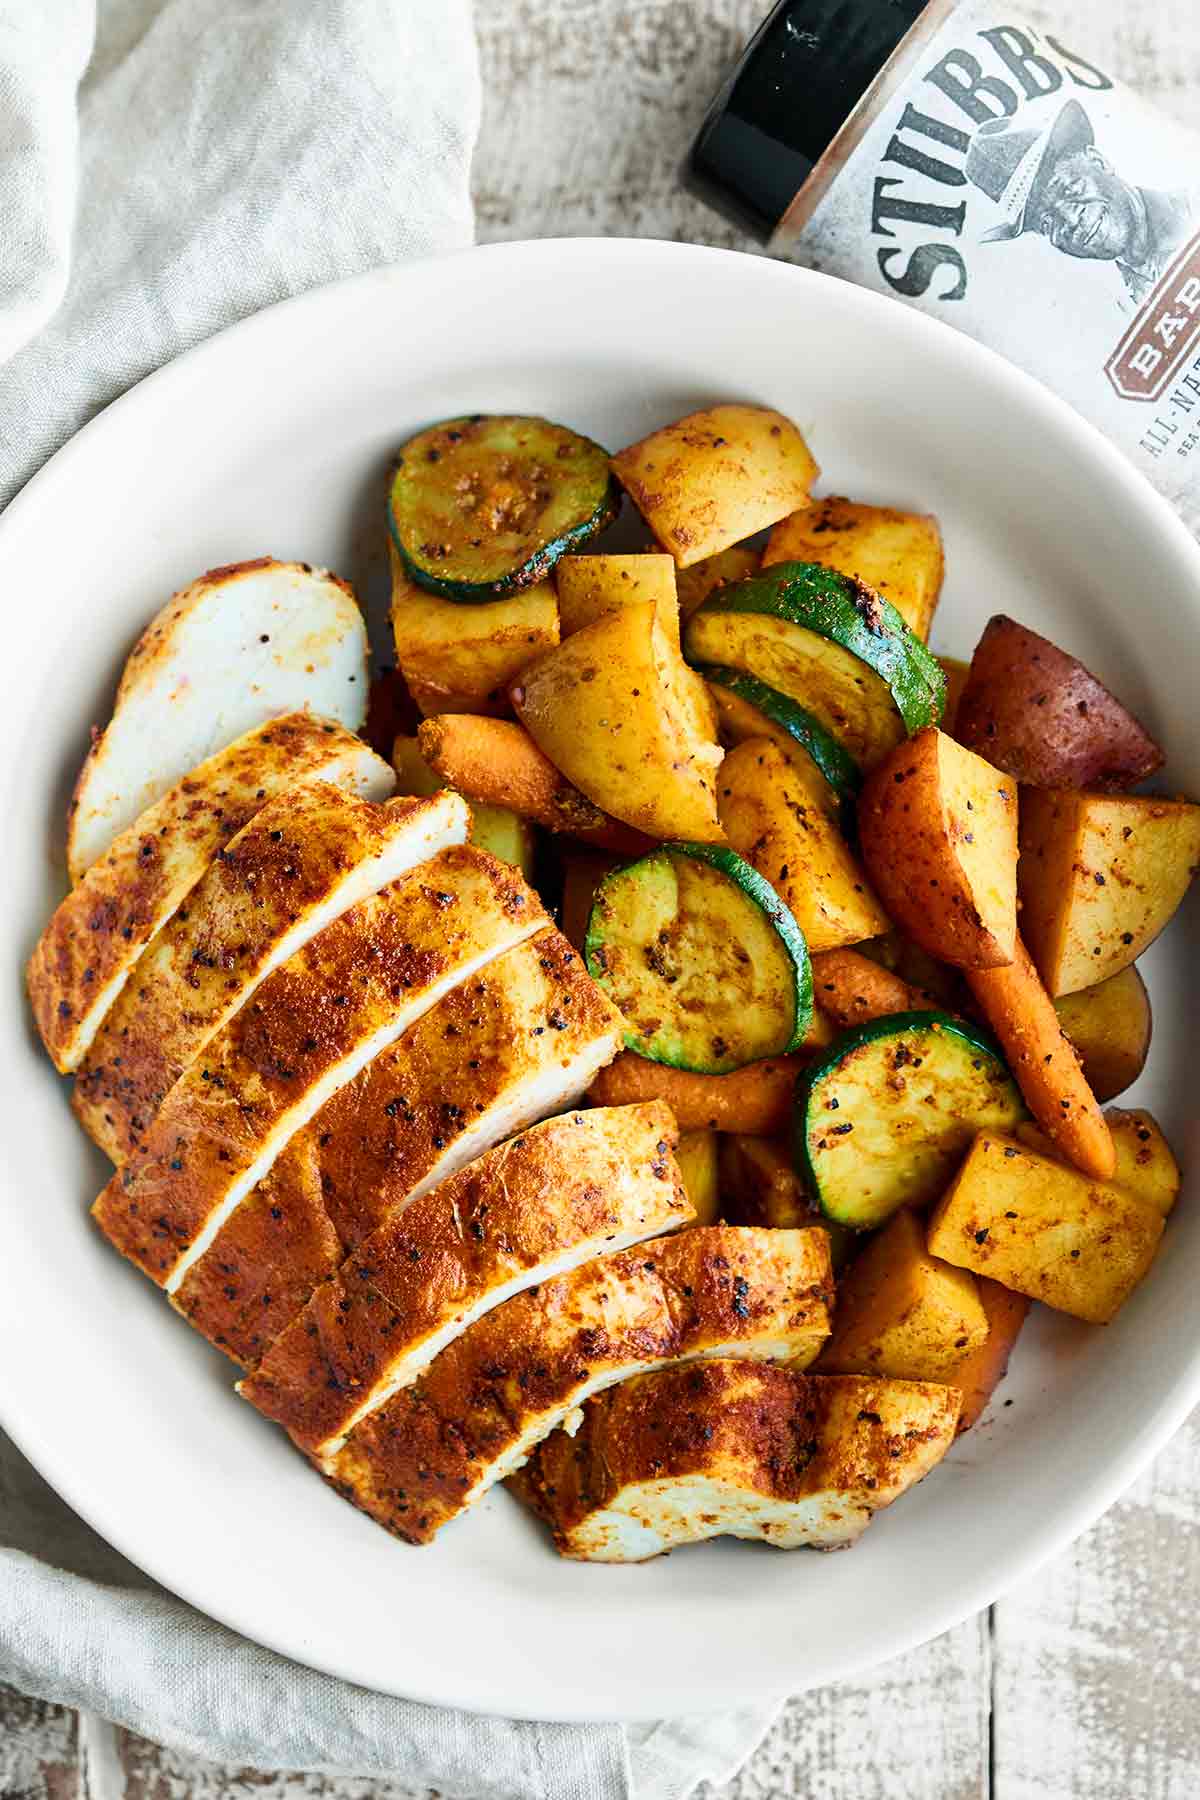 Sliced chicken and grilled veggies on plate above